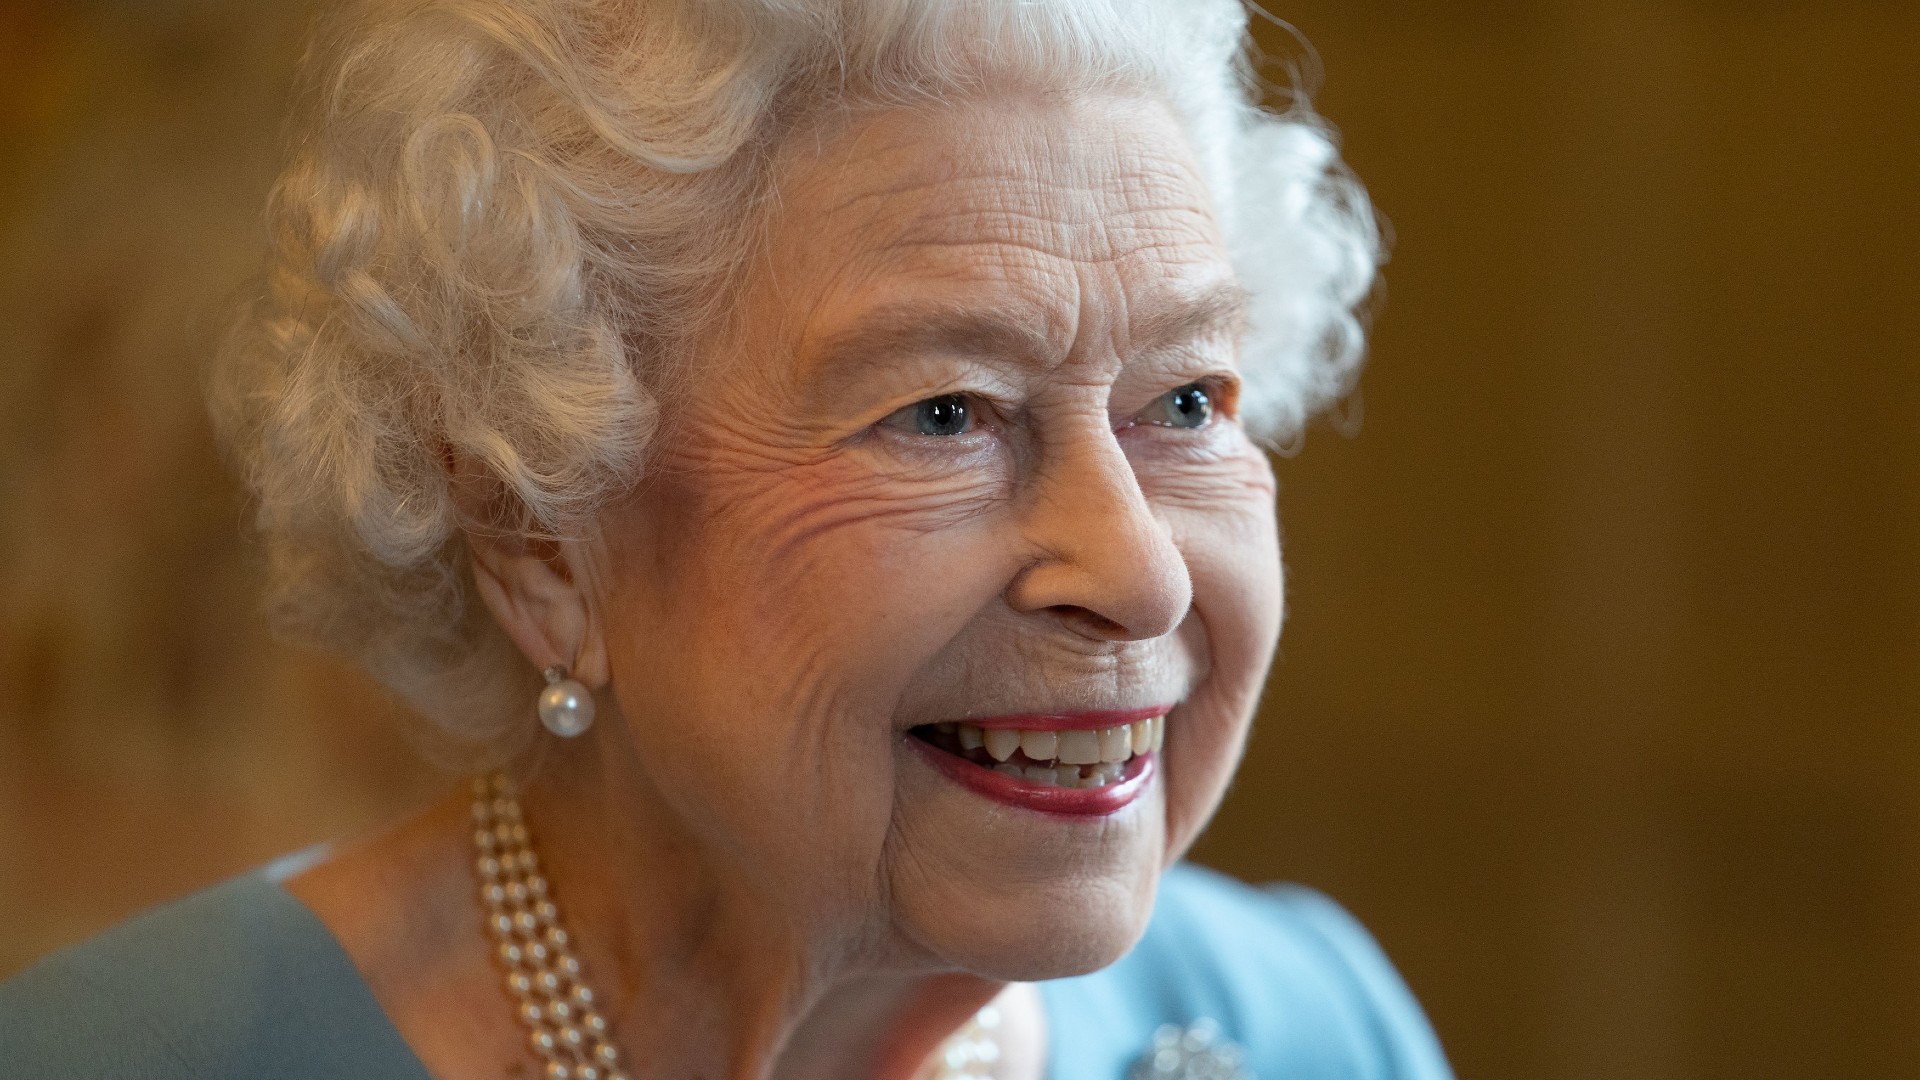 Royal Historian Says, Despite the Queen’s Physical Mobility Issues, “She Is in Charge”